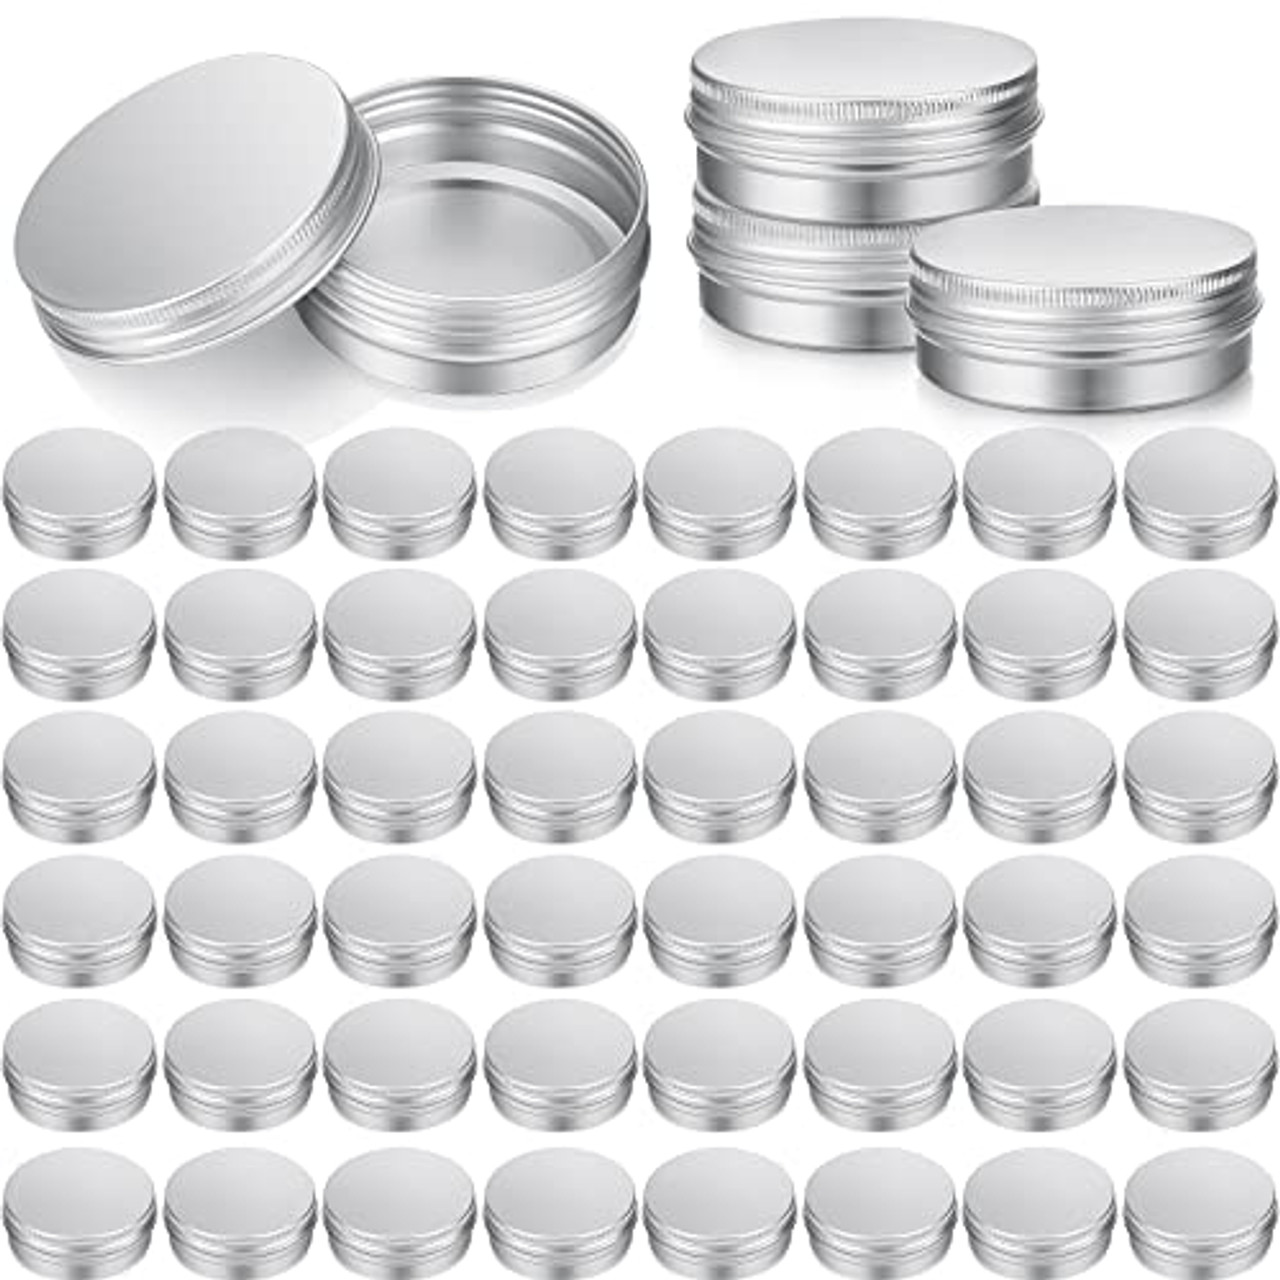 64 Pieces Screw Top Round Tin Cans Aluminum Tin Jar with Screw Lid, Lip  Balm Tin Containers Bottle Empty Travel Cosmetic Sample Tin Cans Container  for